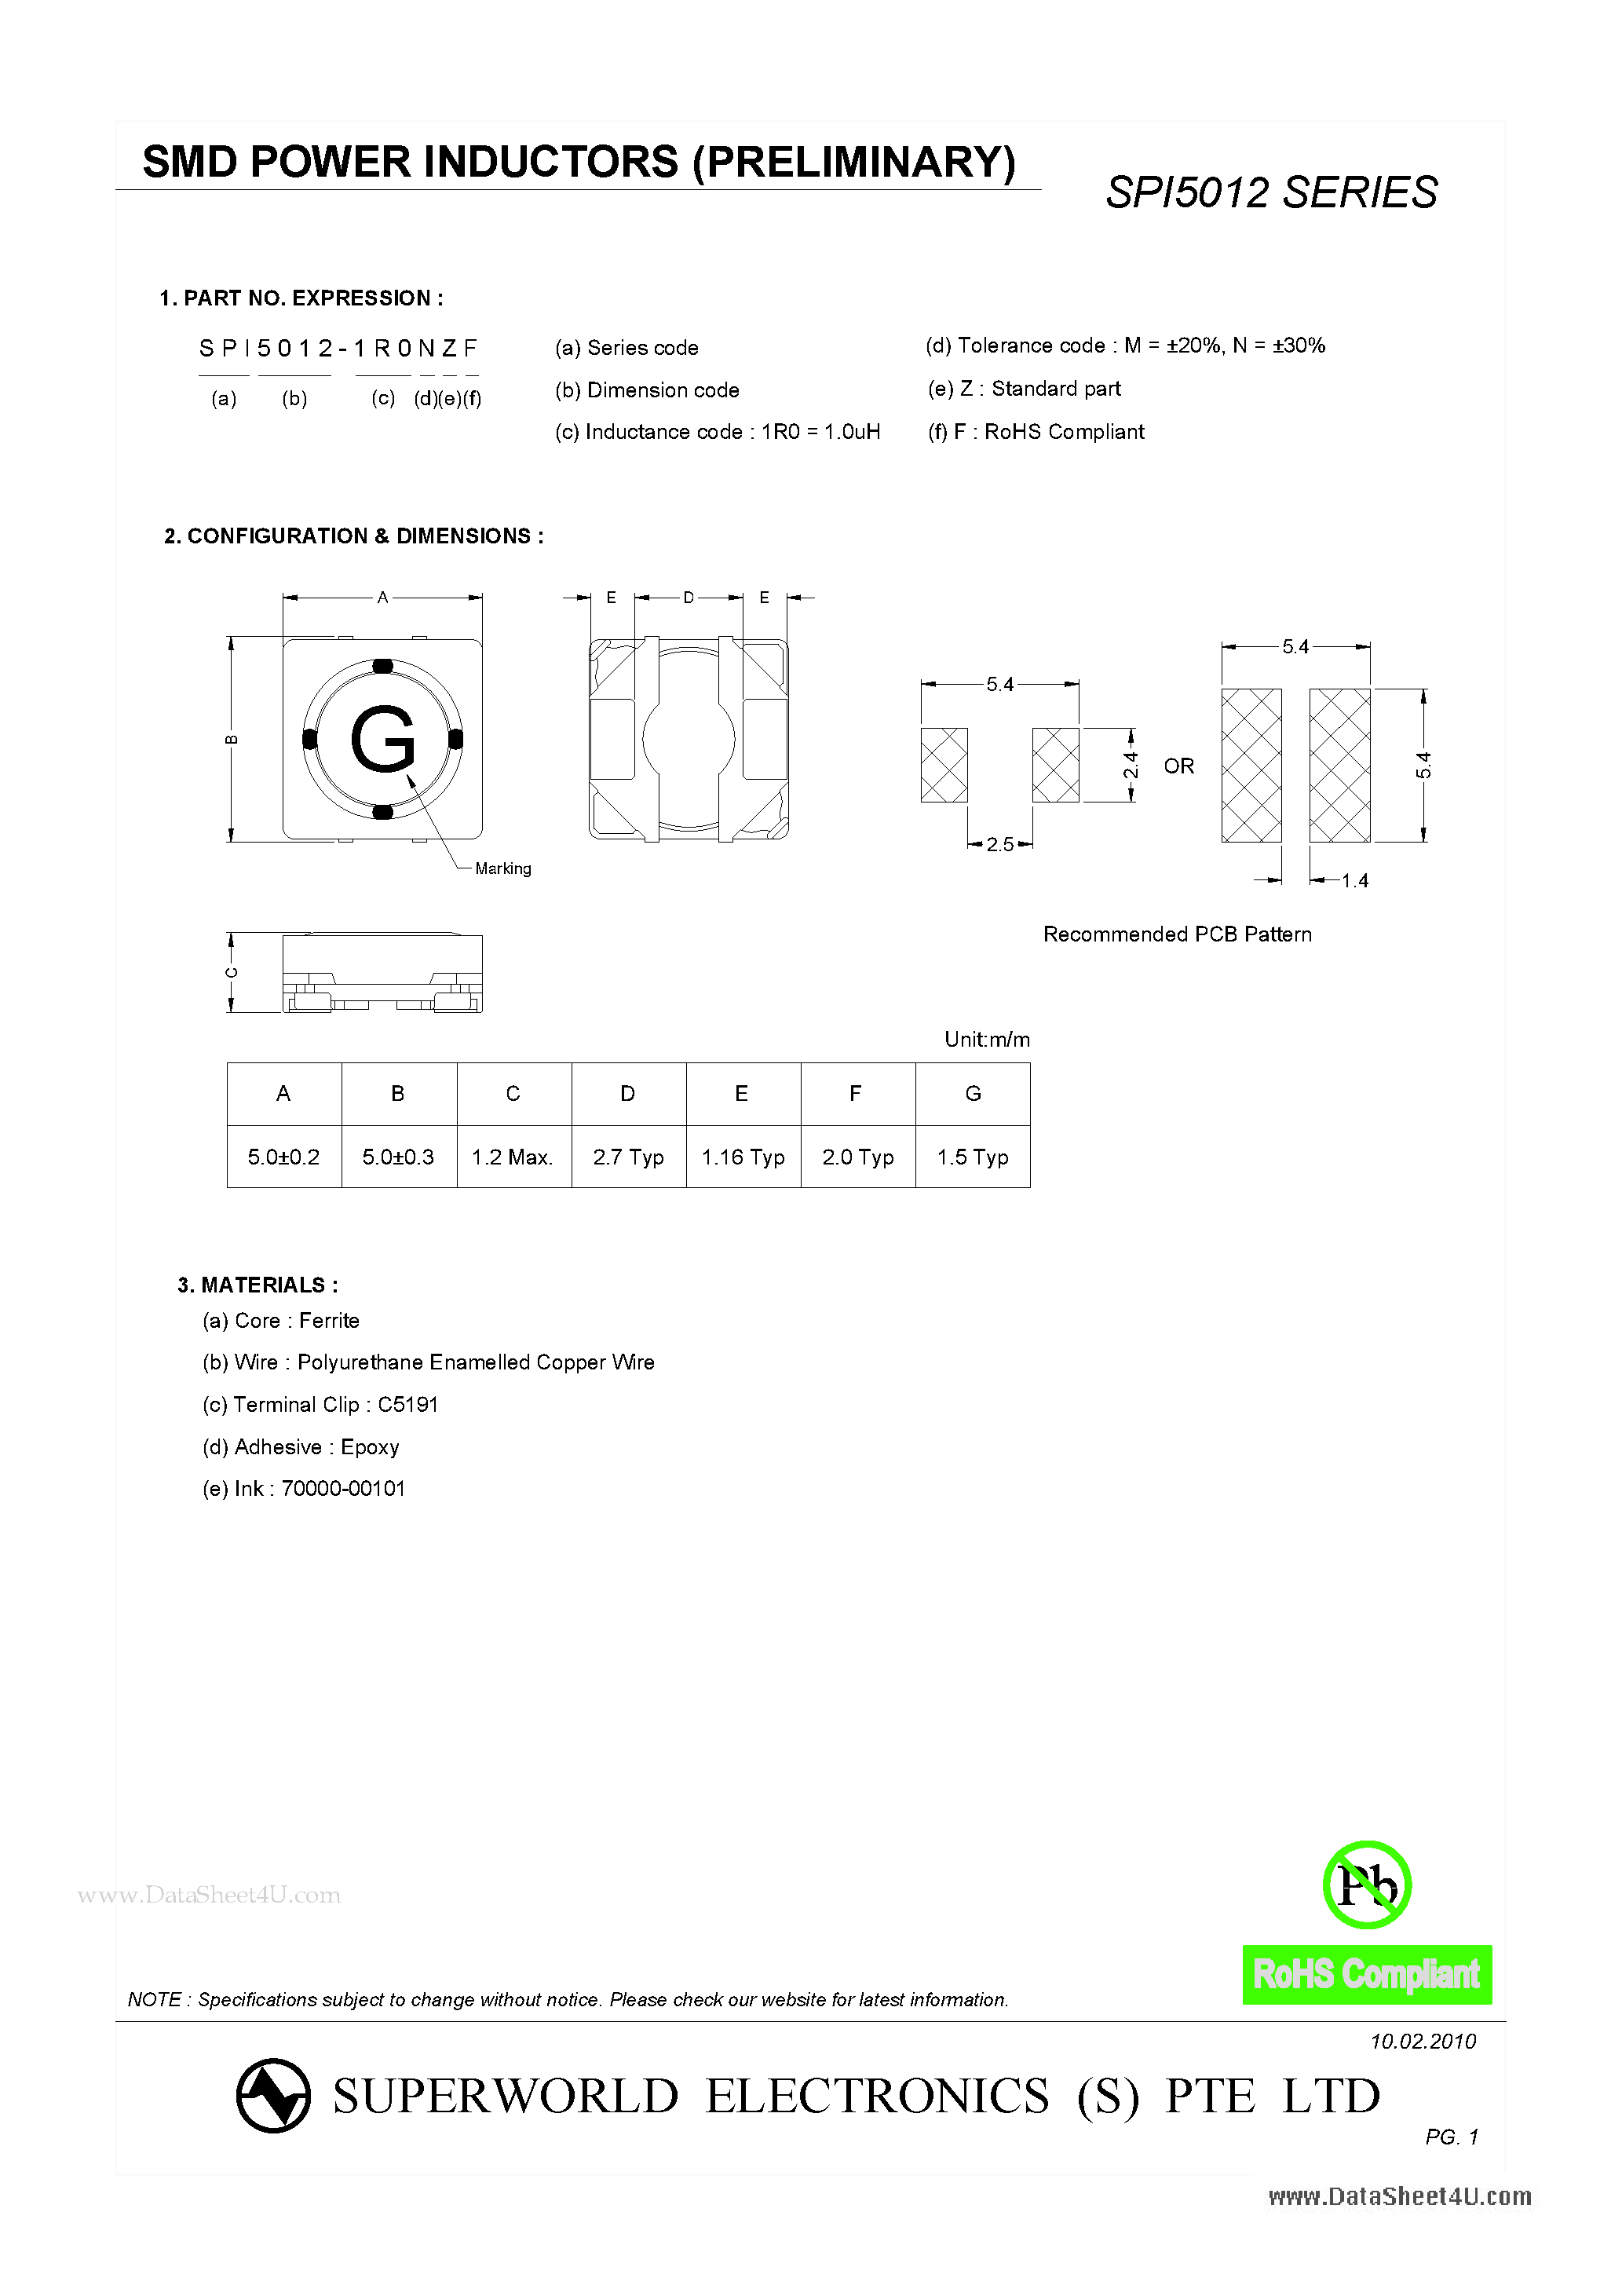 Datasheet SPI5012 - SMD POWER INDUCTORS page 1